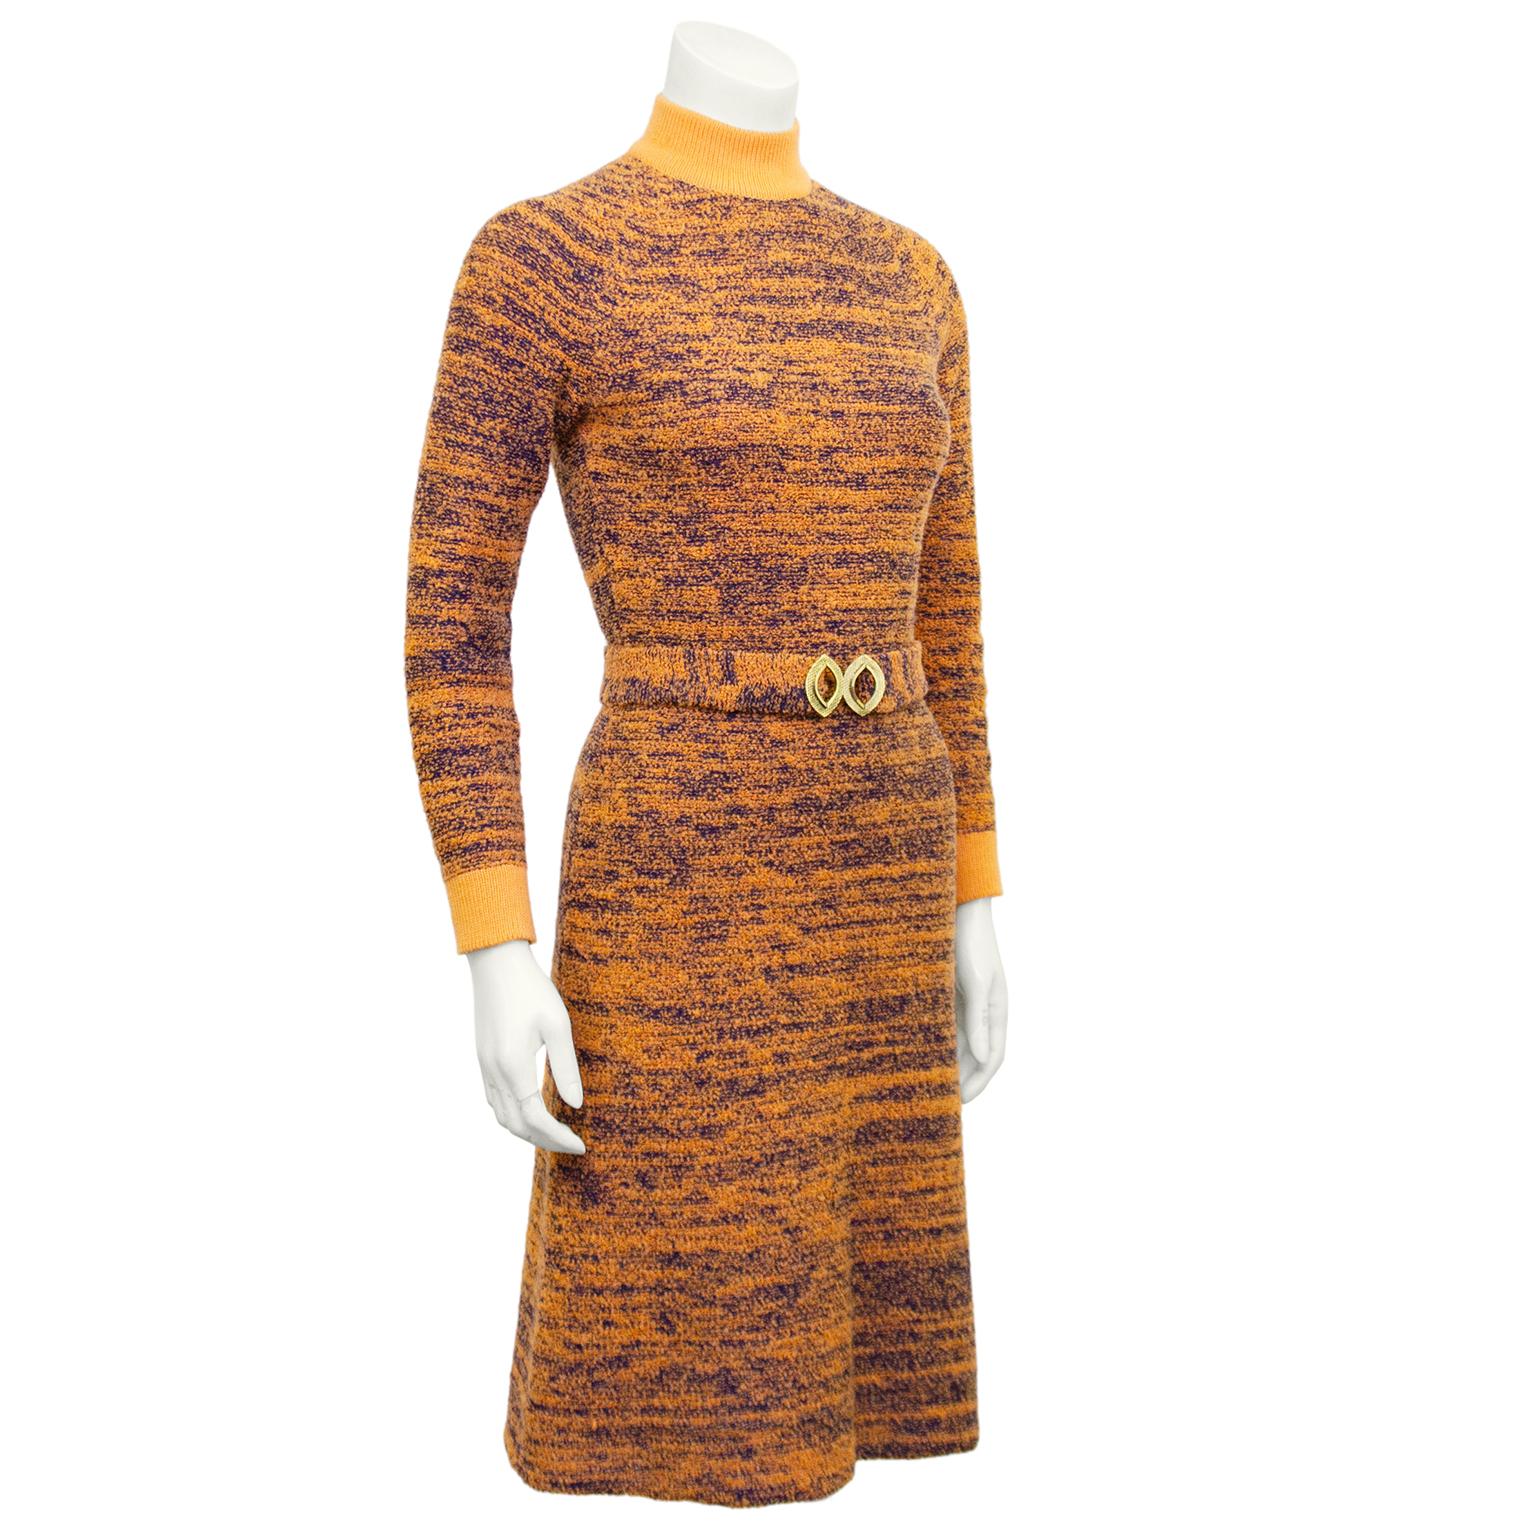 Super cute 1970s marled knit turtleneck dress in tangerine orange and navy blue. Orange ribbed collar and cuffs. Long sleeve and slight a-line shape. Optional matching waist belt with gold tone buckle. Perfect with knee high boots in the fall.